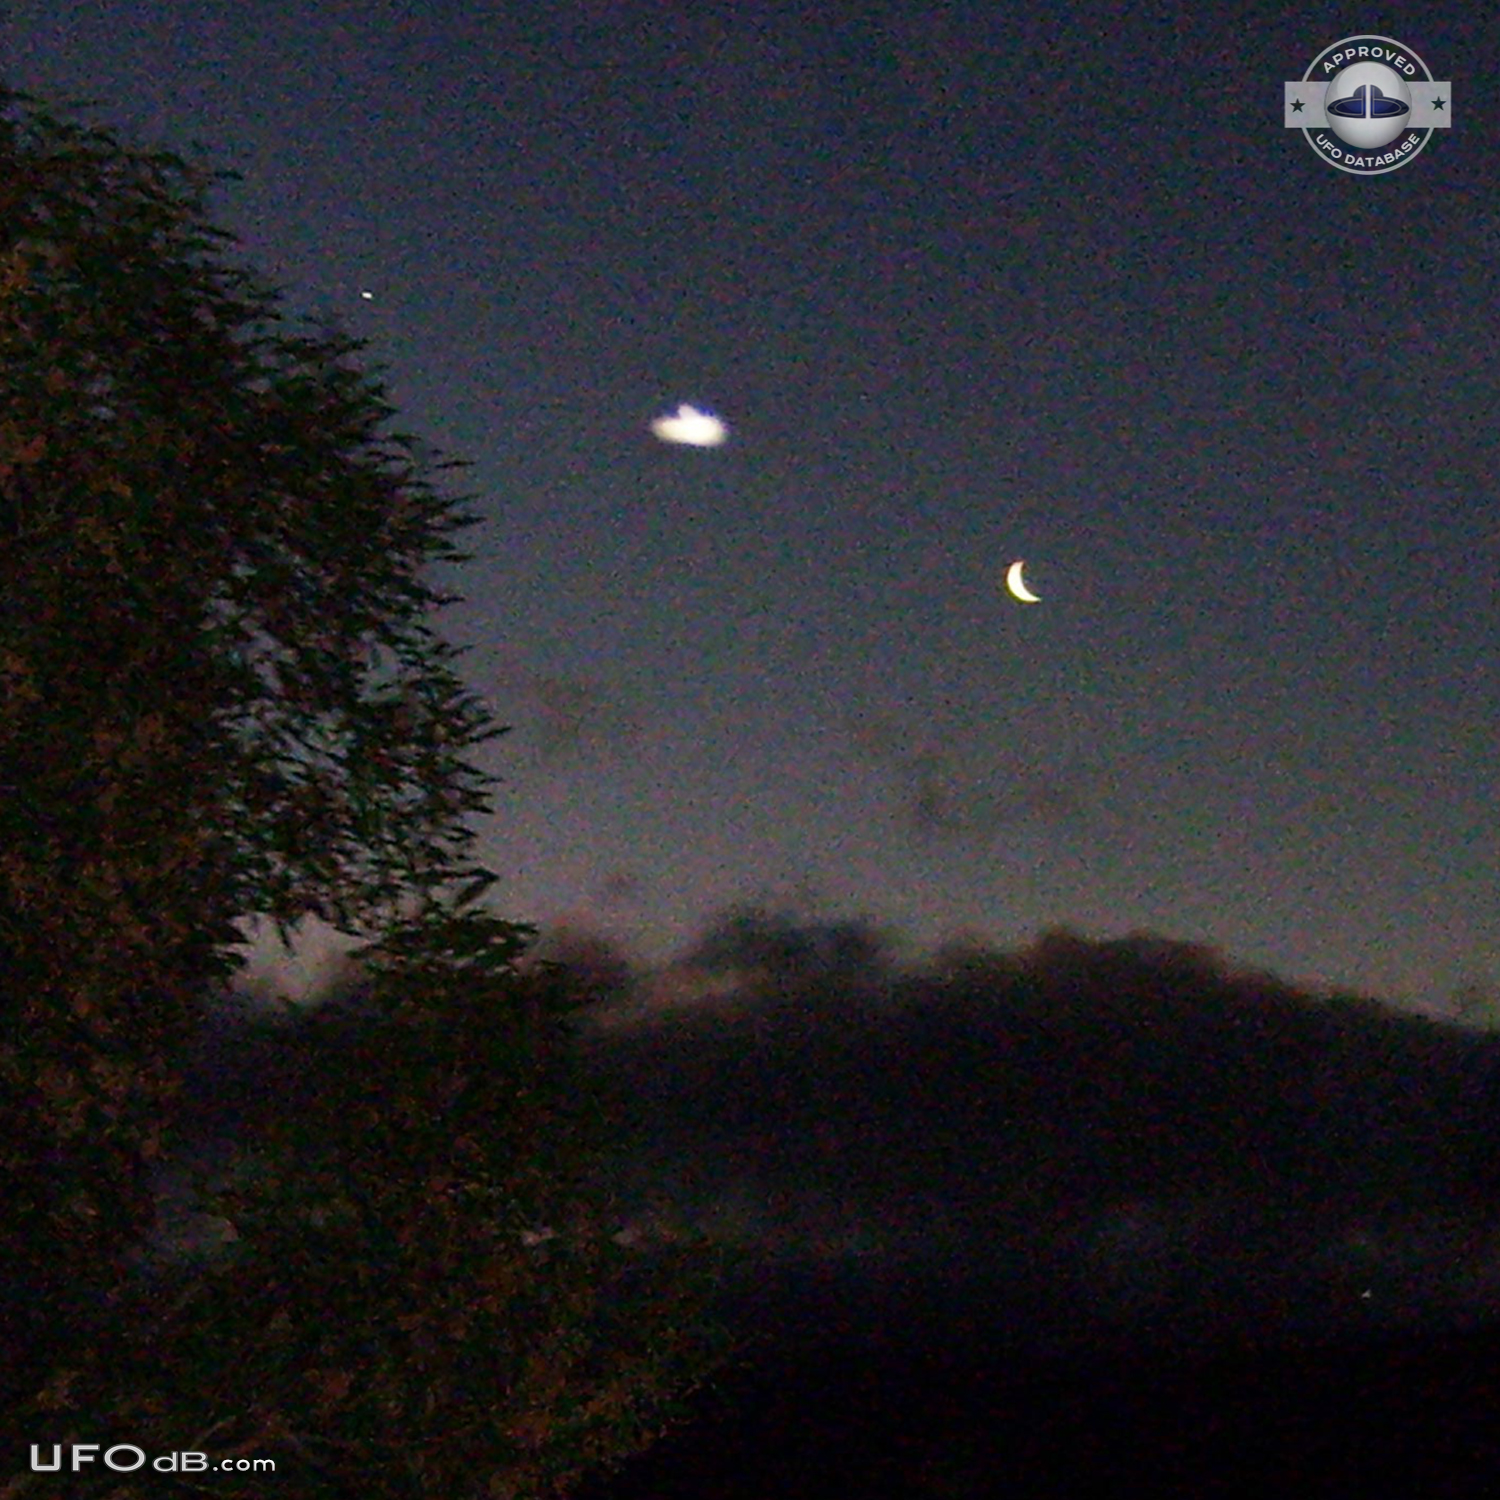 White Saucer ufo caught on picture at night over Curico, Chile - 2012 UFO Picture #406-2